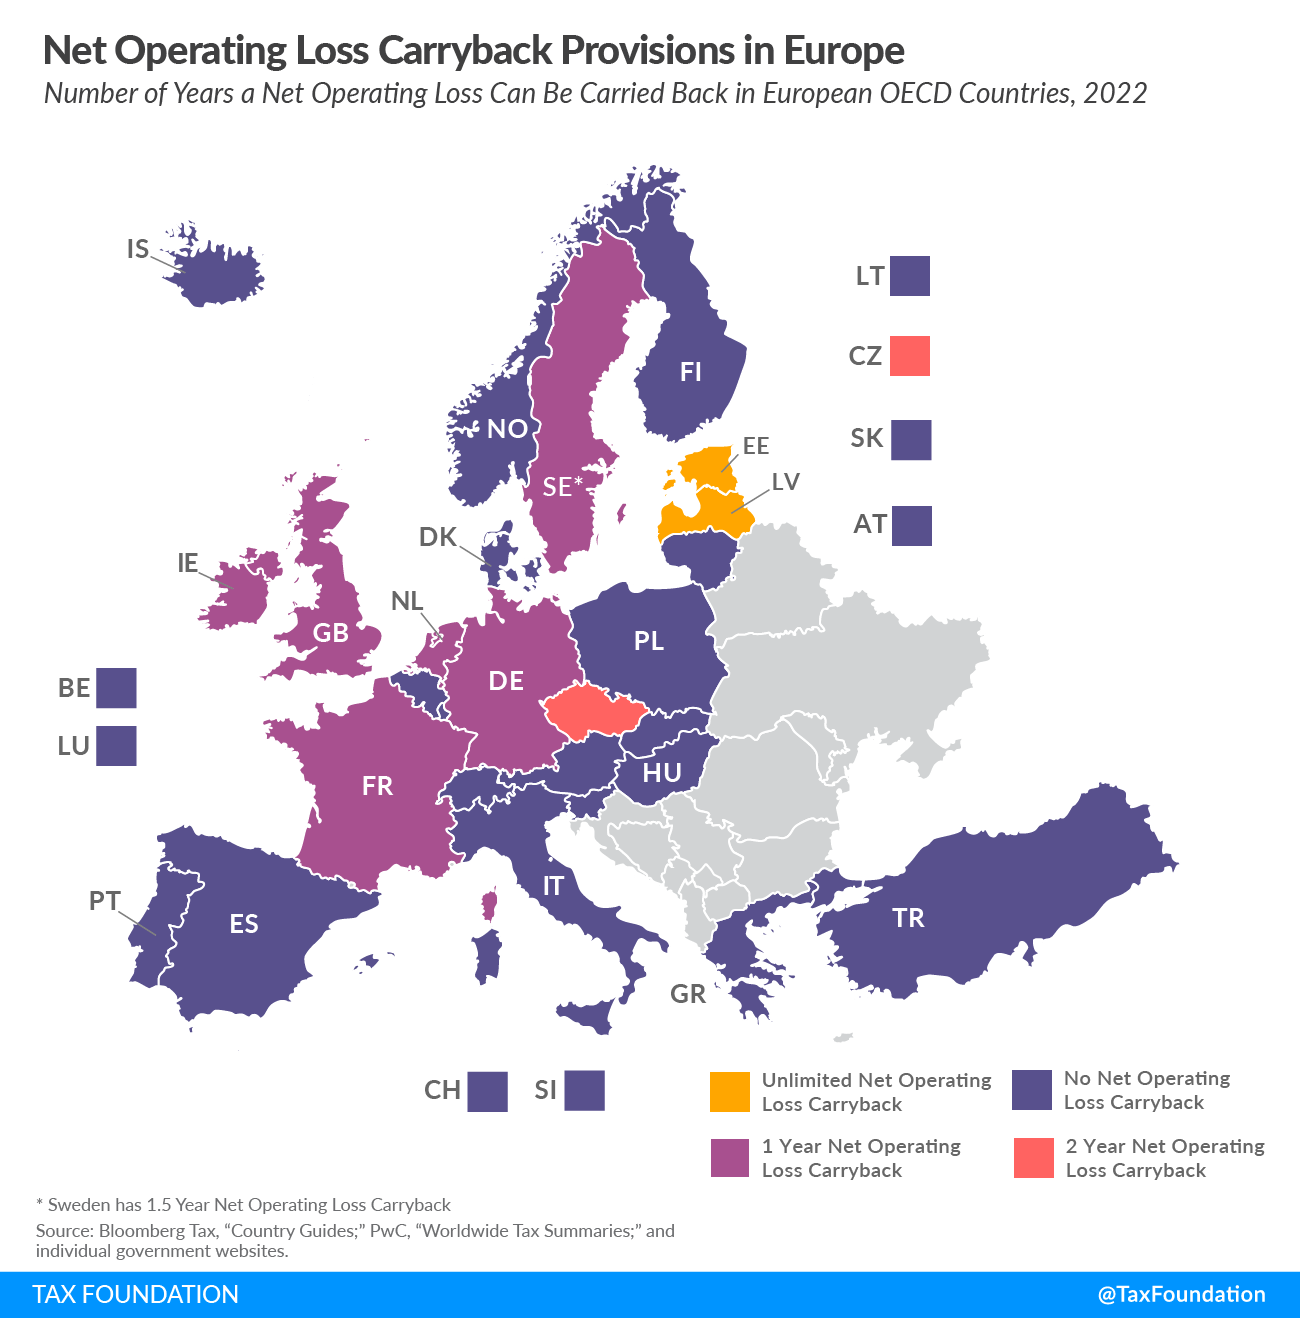 Net Operating Loss Carryforward and net operating loss Carryback Provisions and deductions in Europe 2022